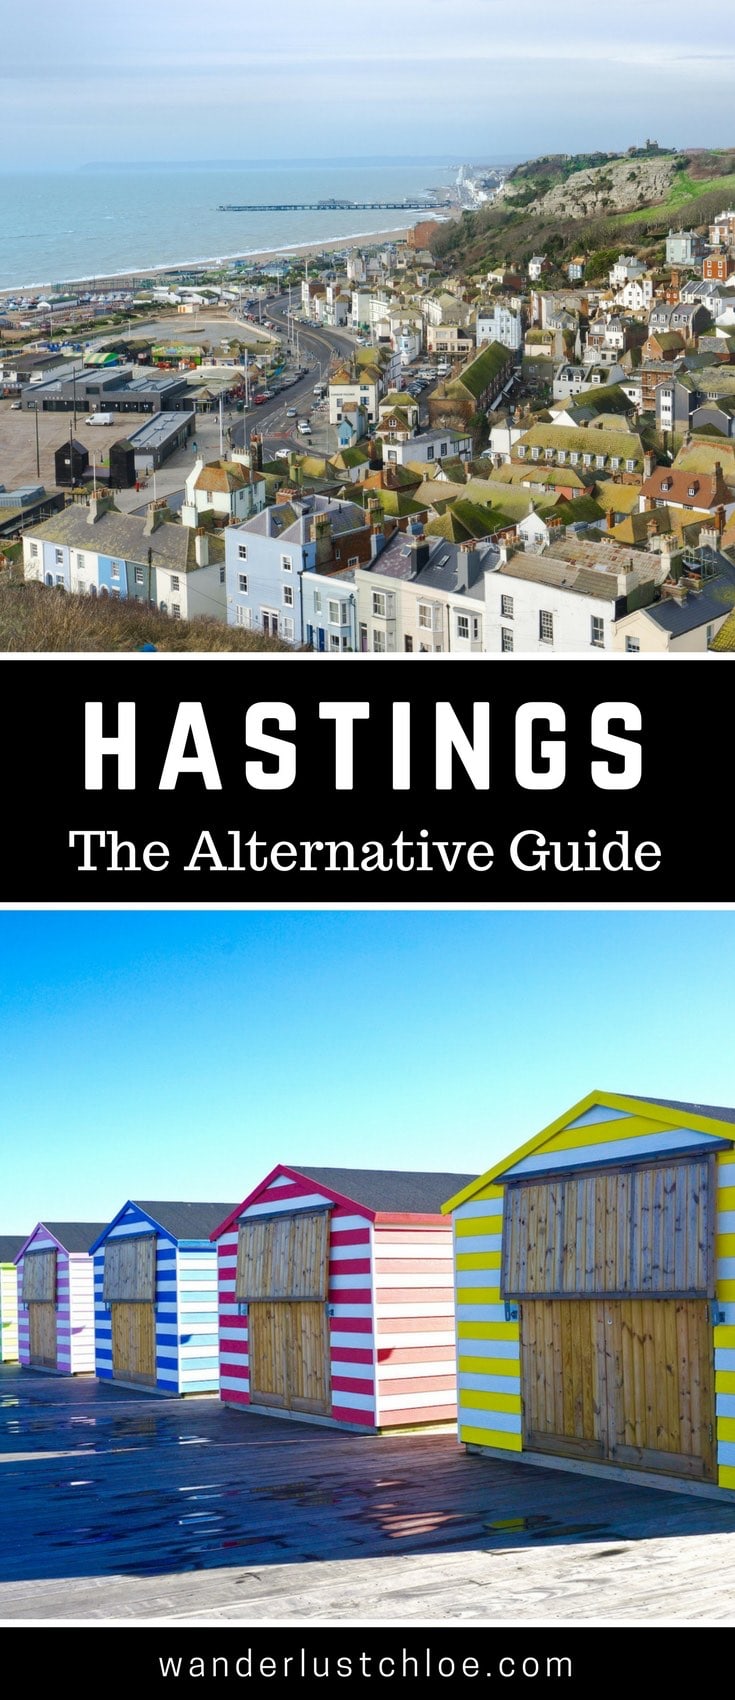 Hastings - The Alternative Guide